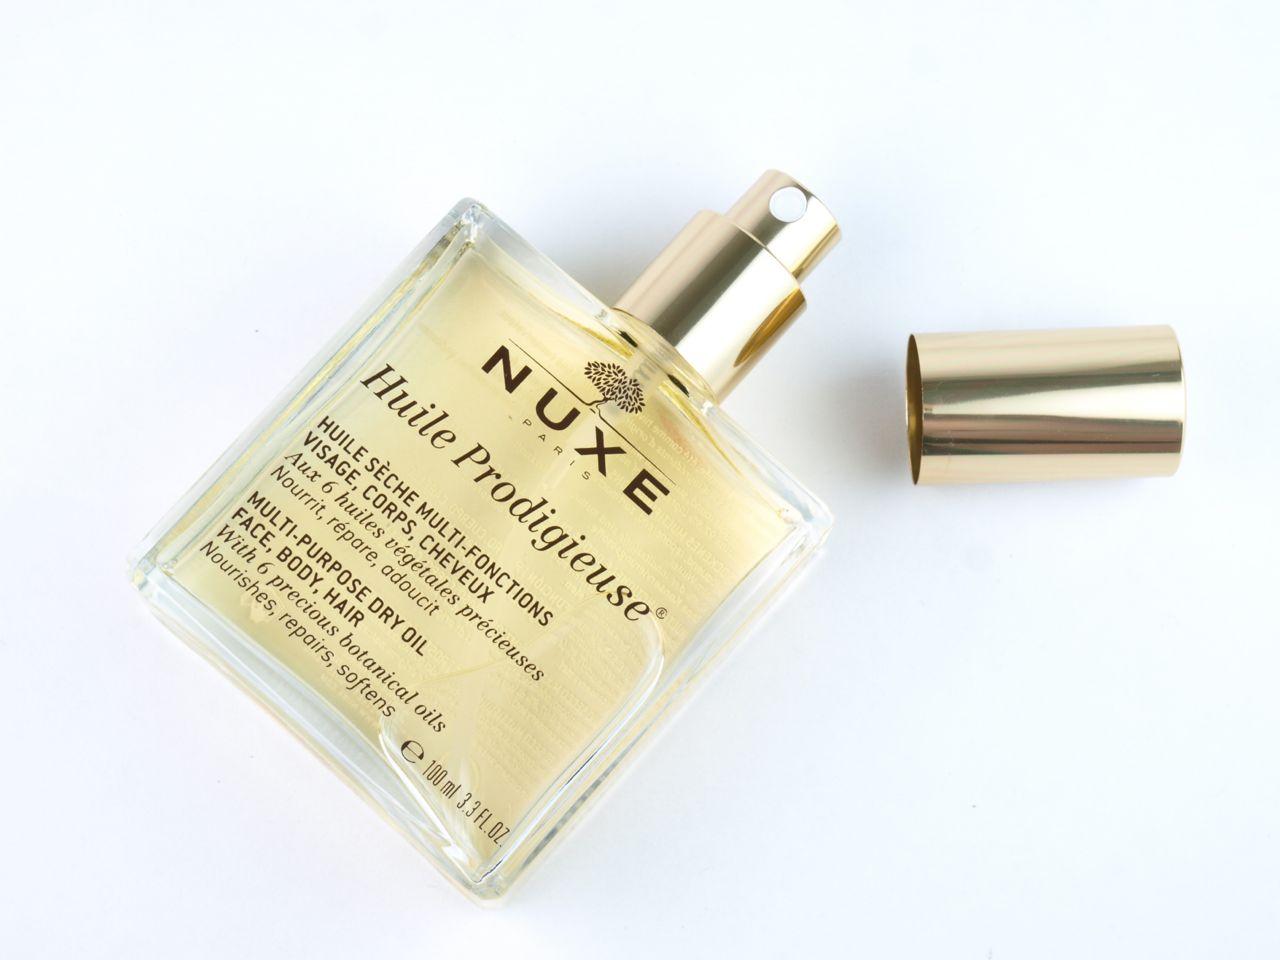 Nuxe Huile Prodigieuse & Huile Prodigieuse Or Multi-Purpose Dry Oil for Face, Body & Hair: Review